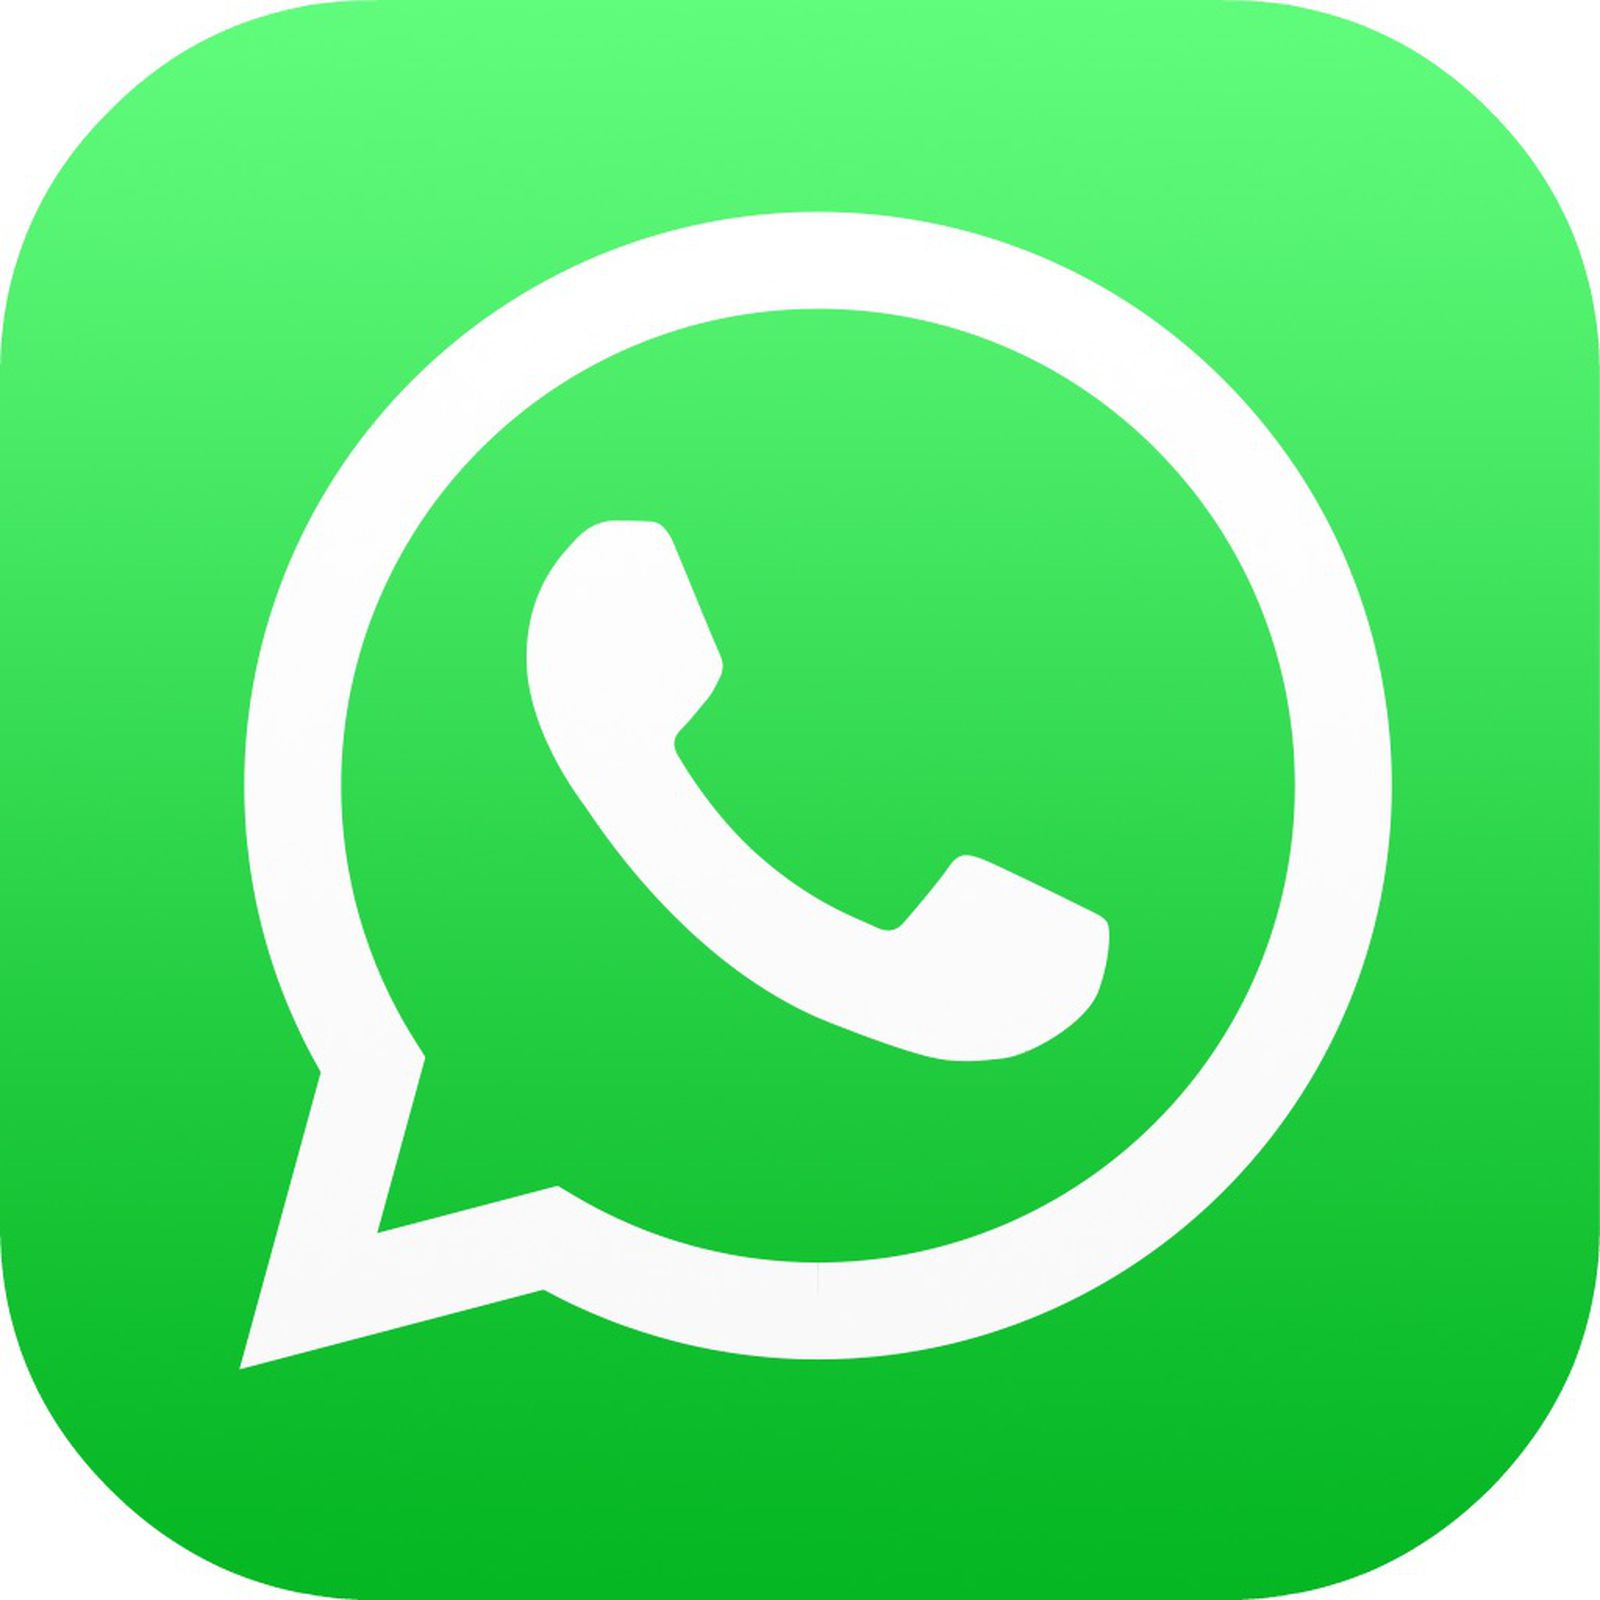 Mandatory update of WhatsApp’s privacy policy allows user data with Facebook